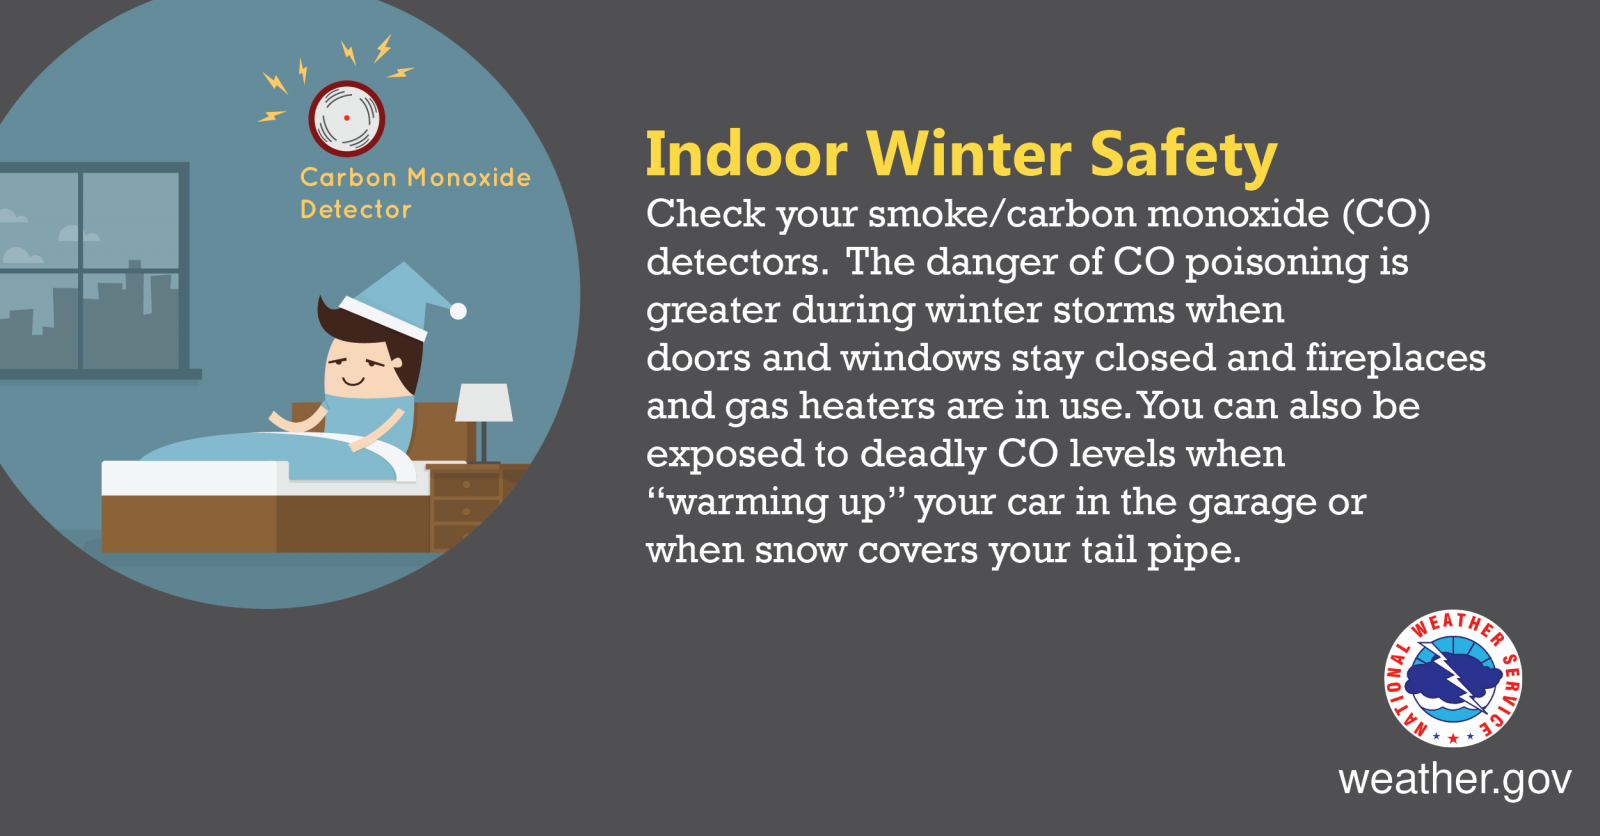 Indoor Winter Safety - Check your smoke/carbon monoxide (CO) detectors. The danger of CO poisoning is greater during winter storms when doors and windows stay closed and fireplaces and gas heaters are in use. You can also be exposed to deadly CO levels when 'warming up' your car in the garage or when snow covers your tail pipe.